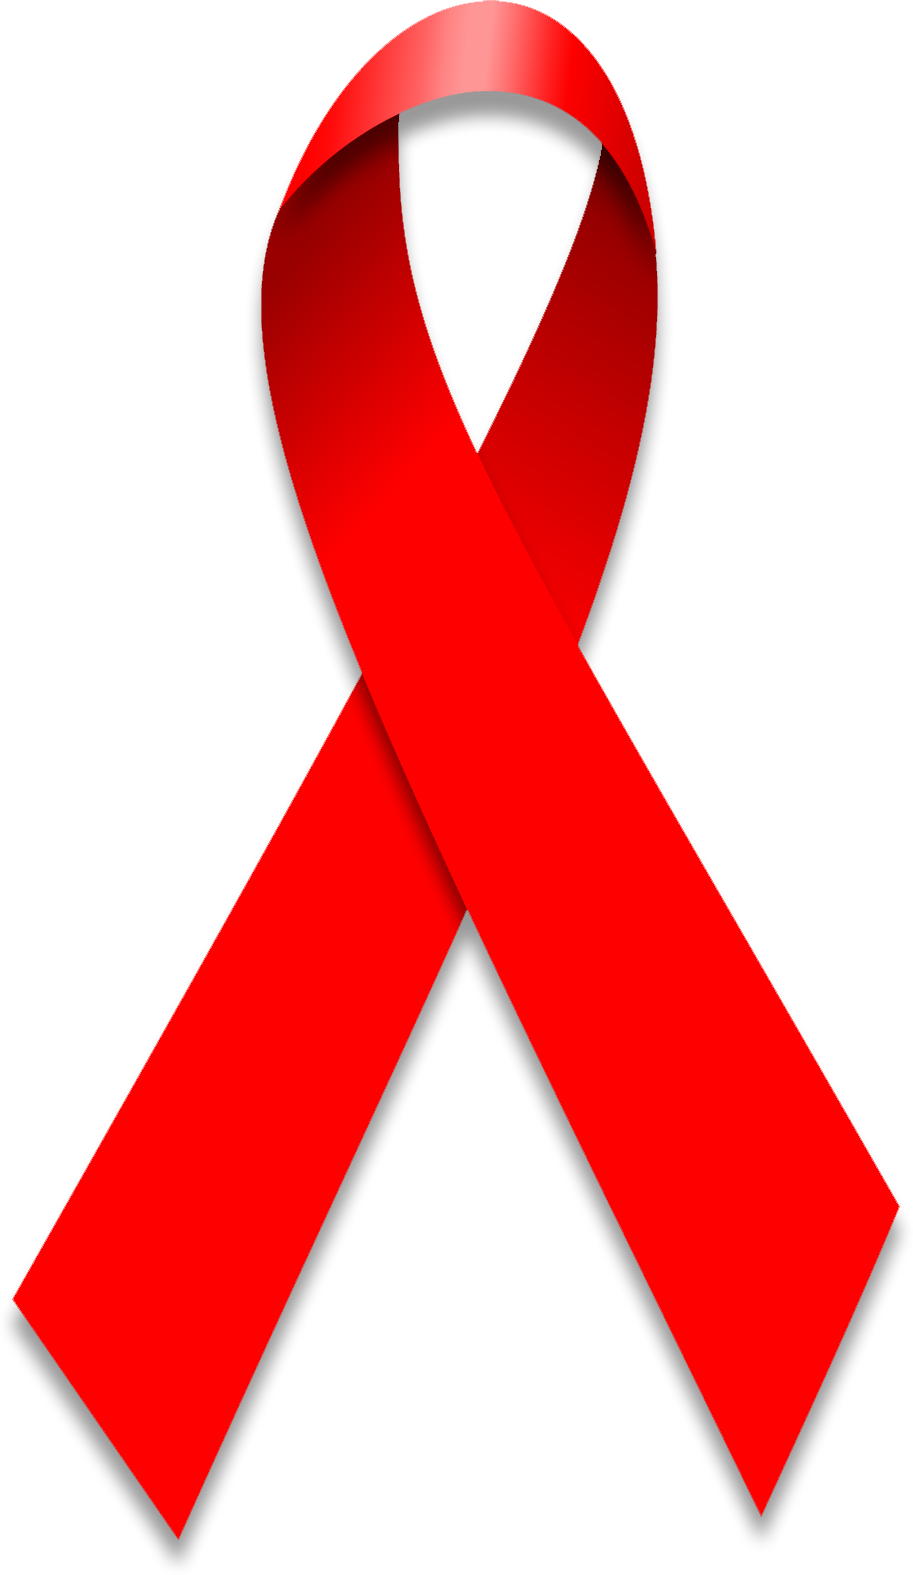 File:HIV.png